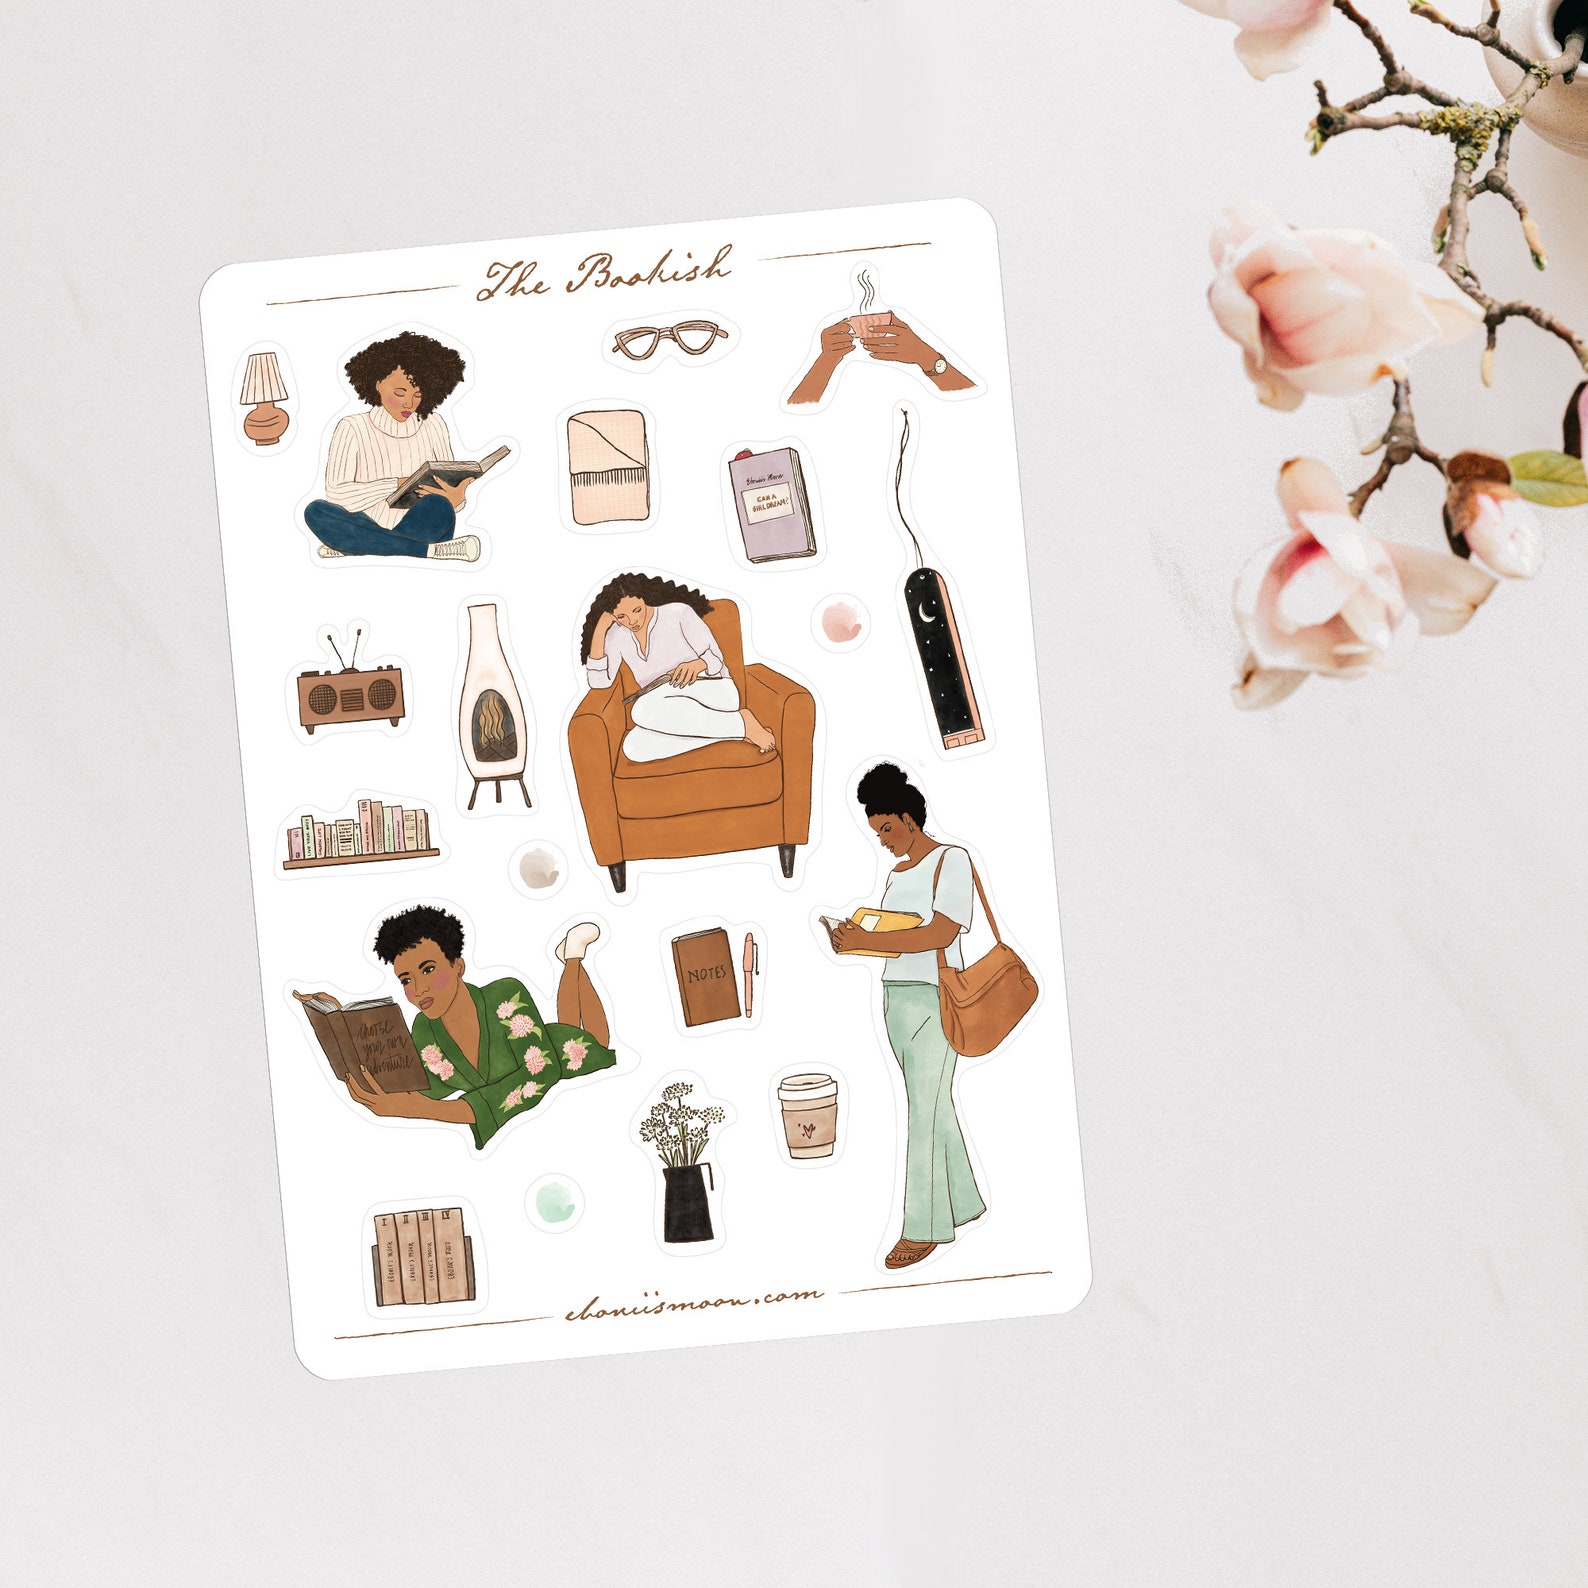 bookish stickers featuring Black women reading in various scenarios, as well as book-themed items